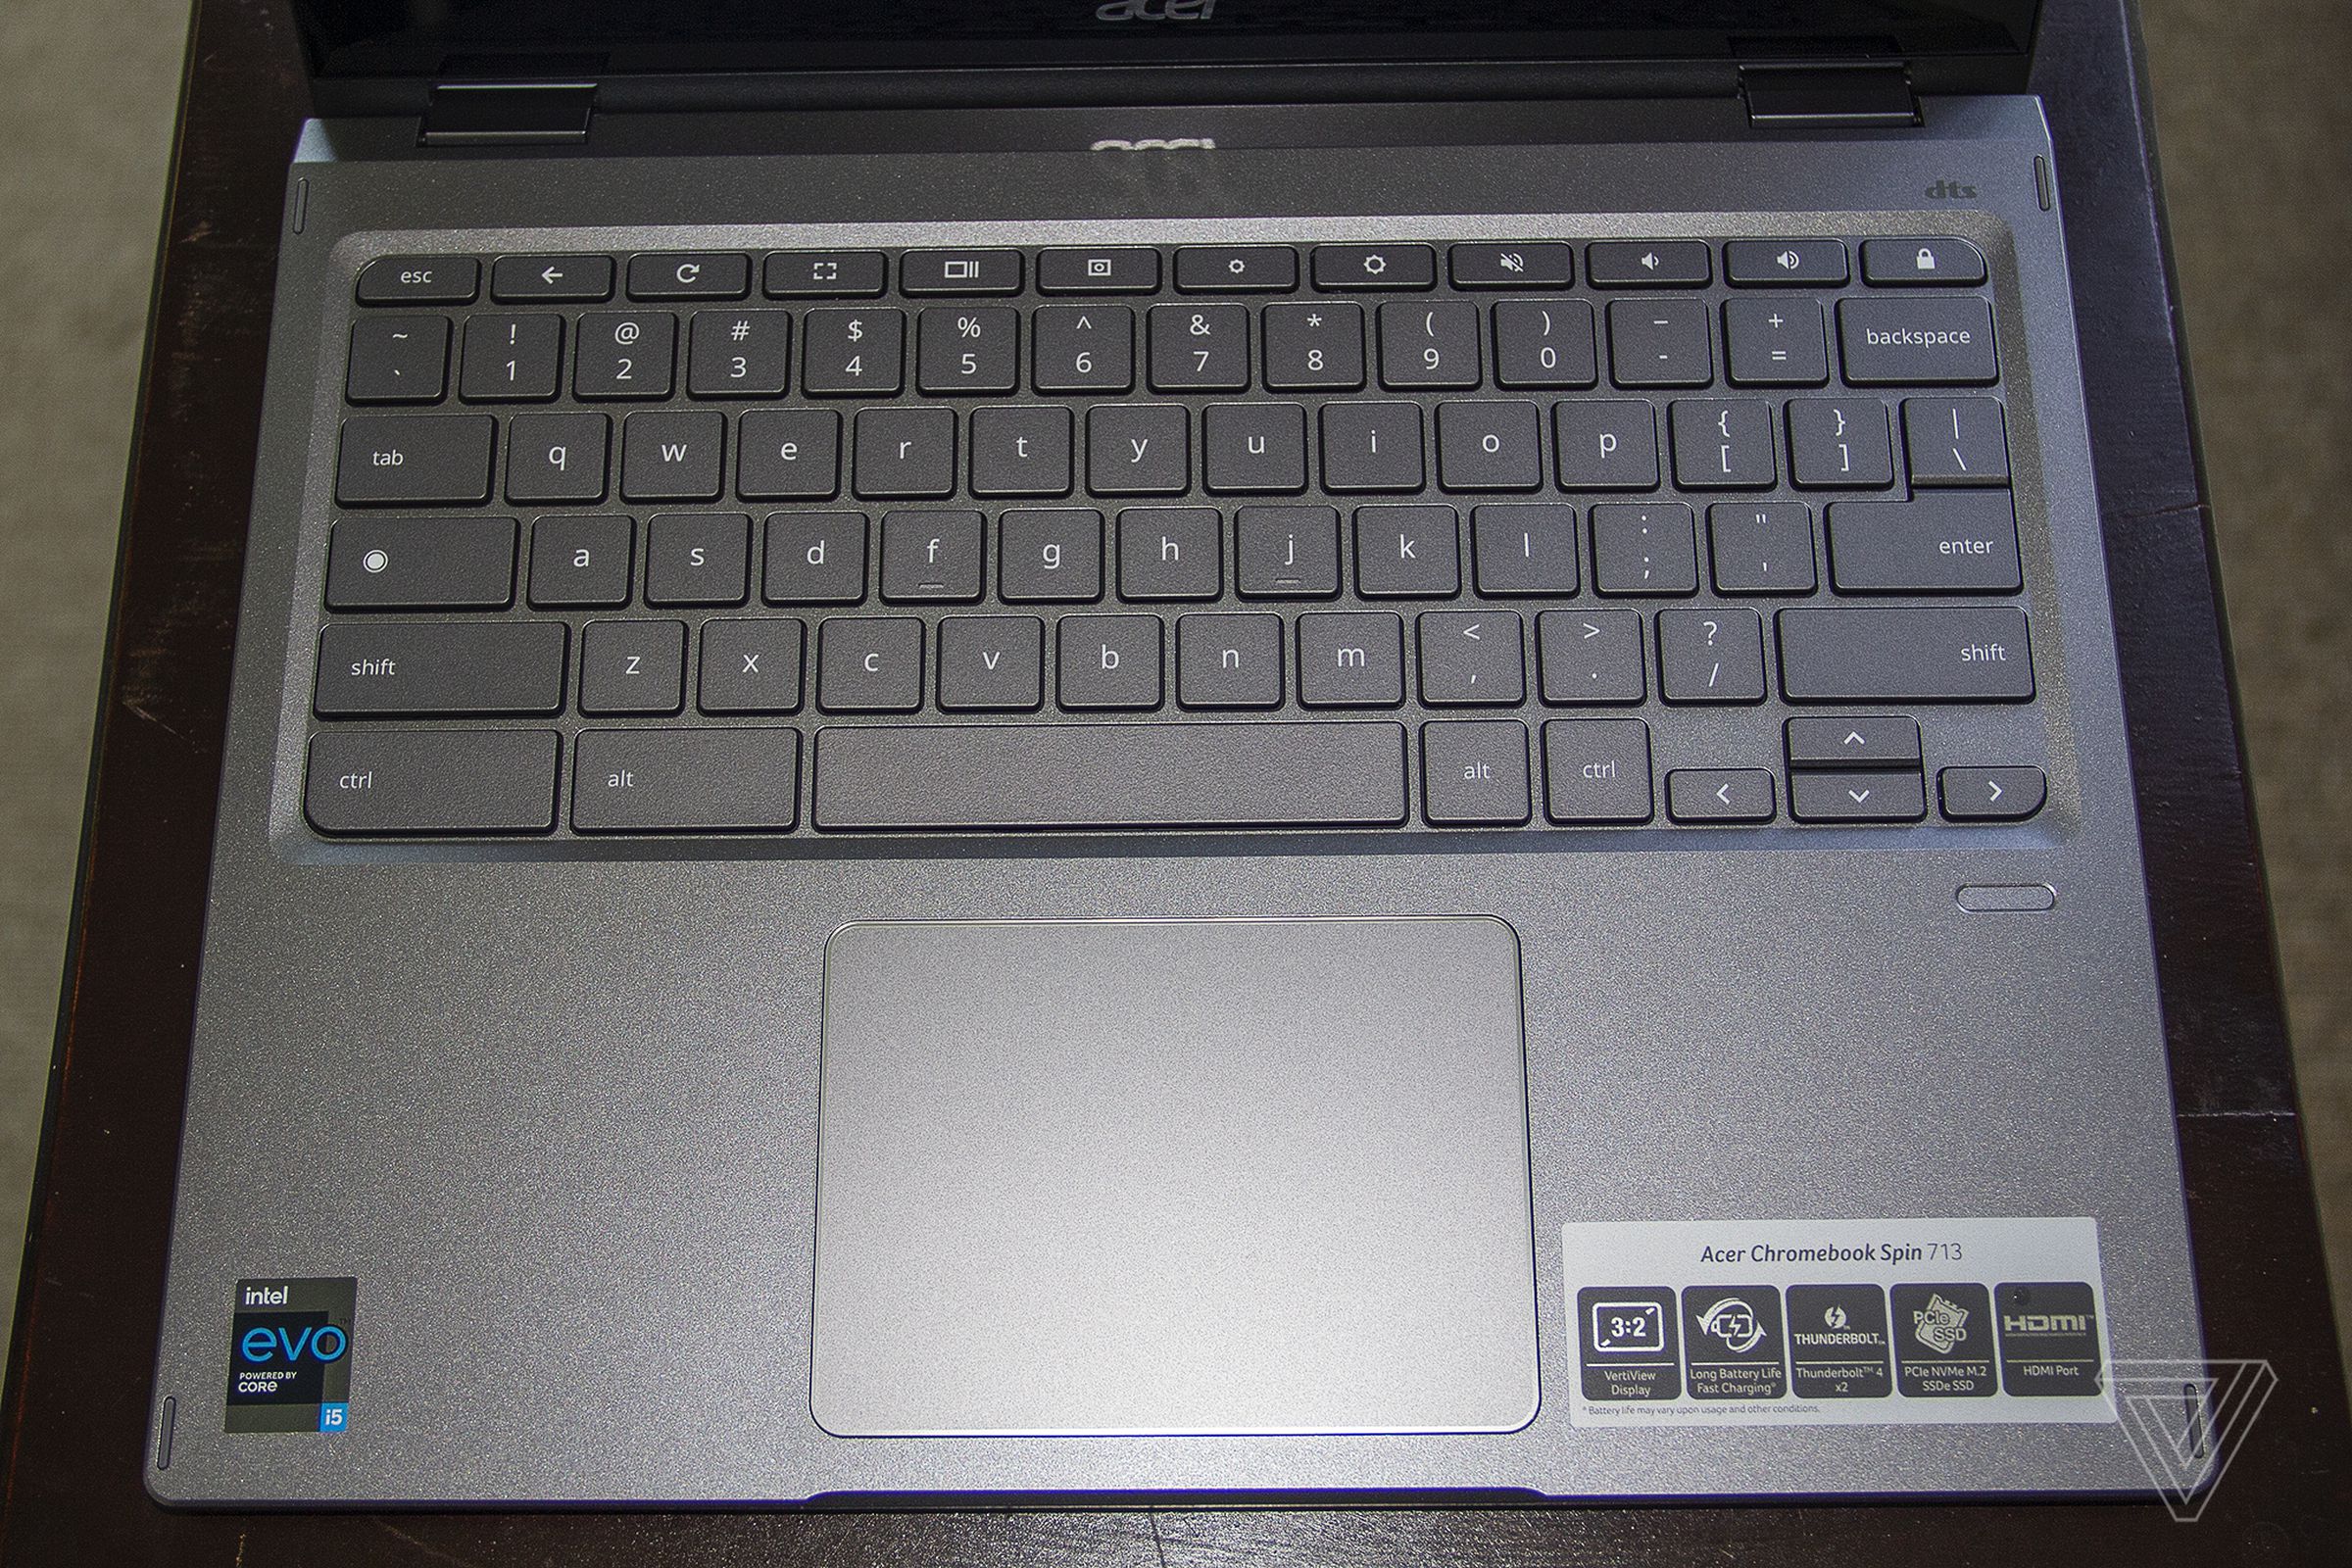 The Acer Chromebook Spin 713 keyboard deck seen from above.